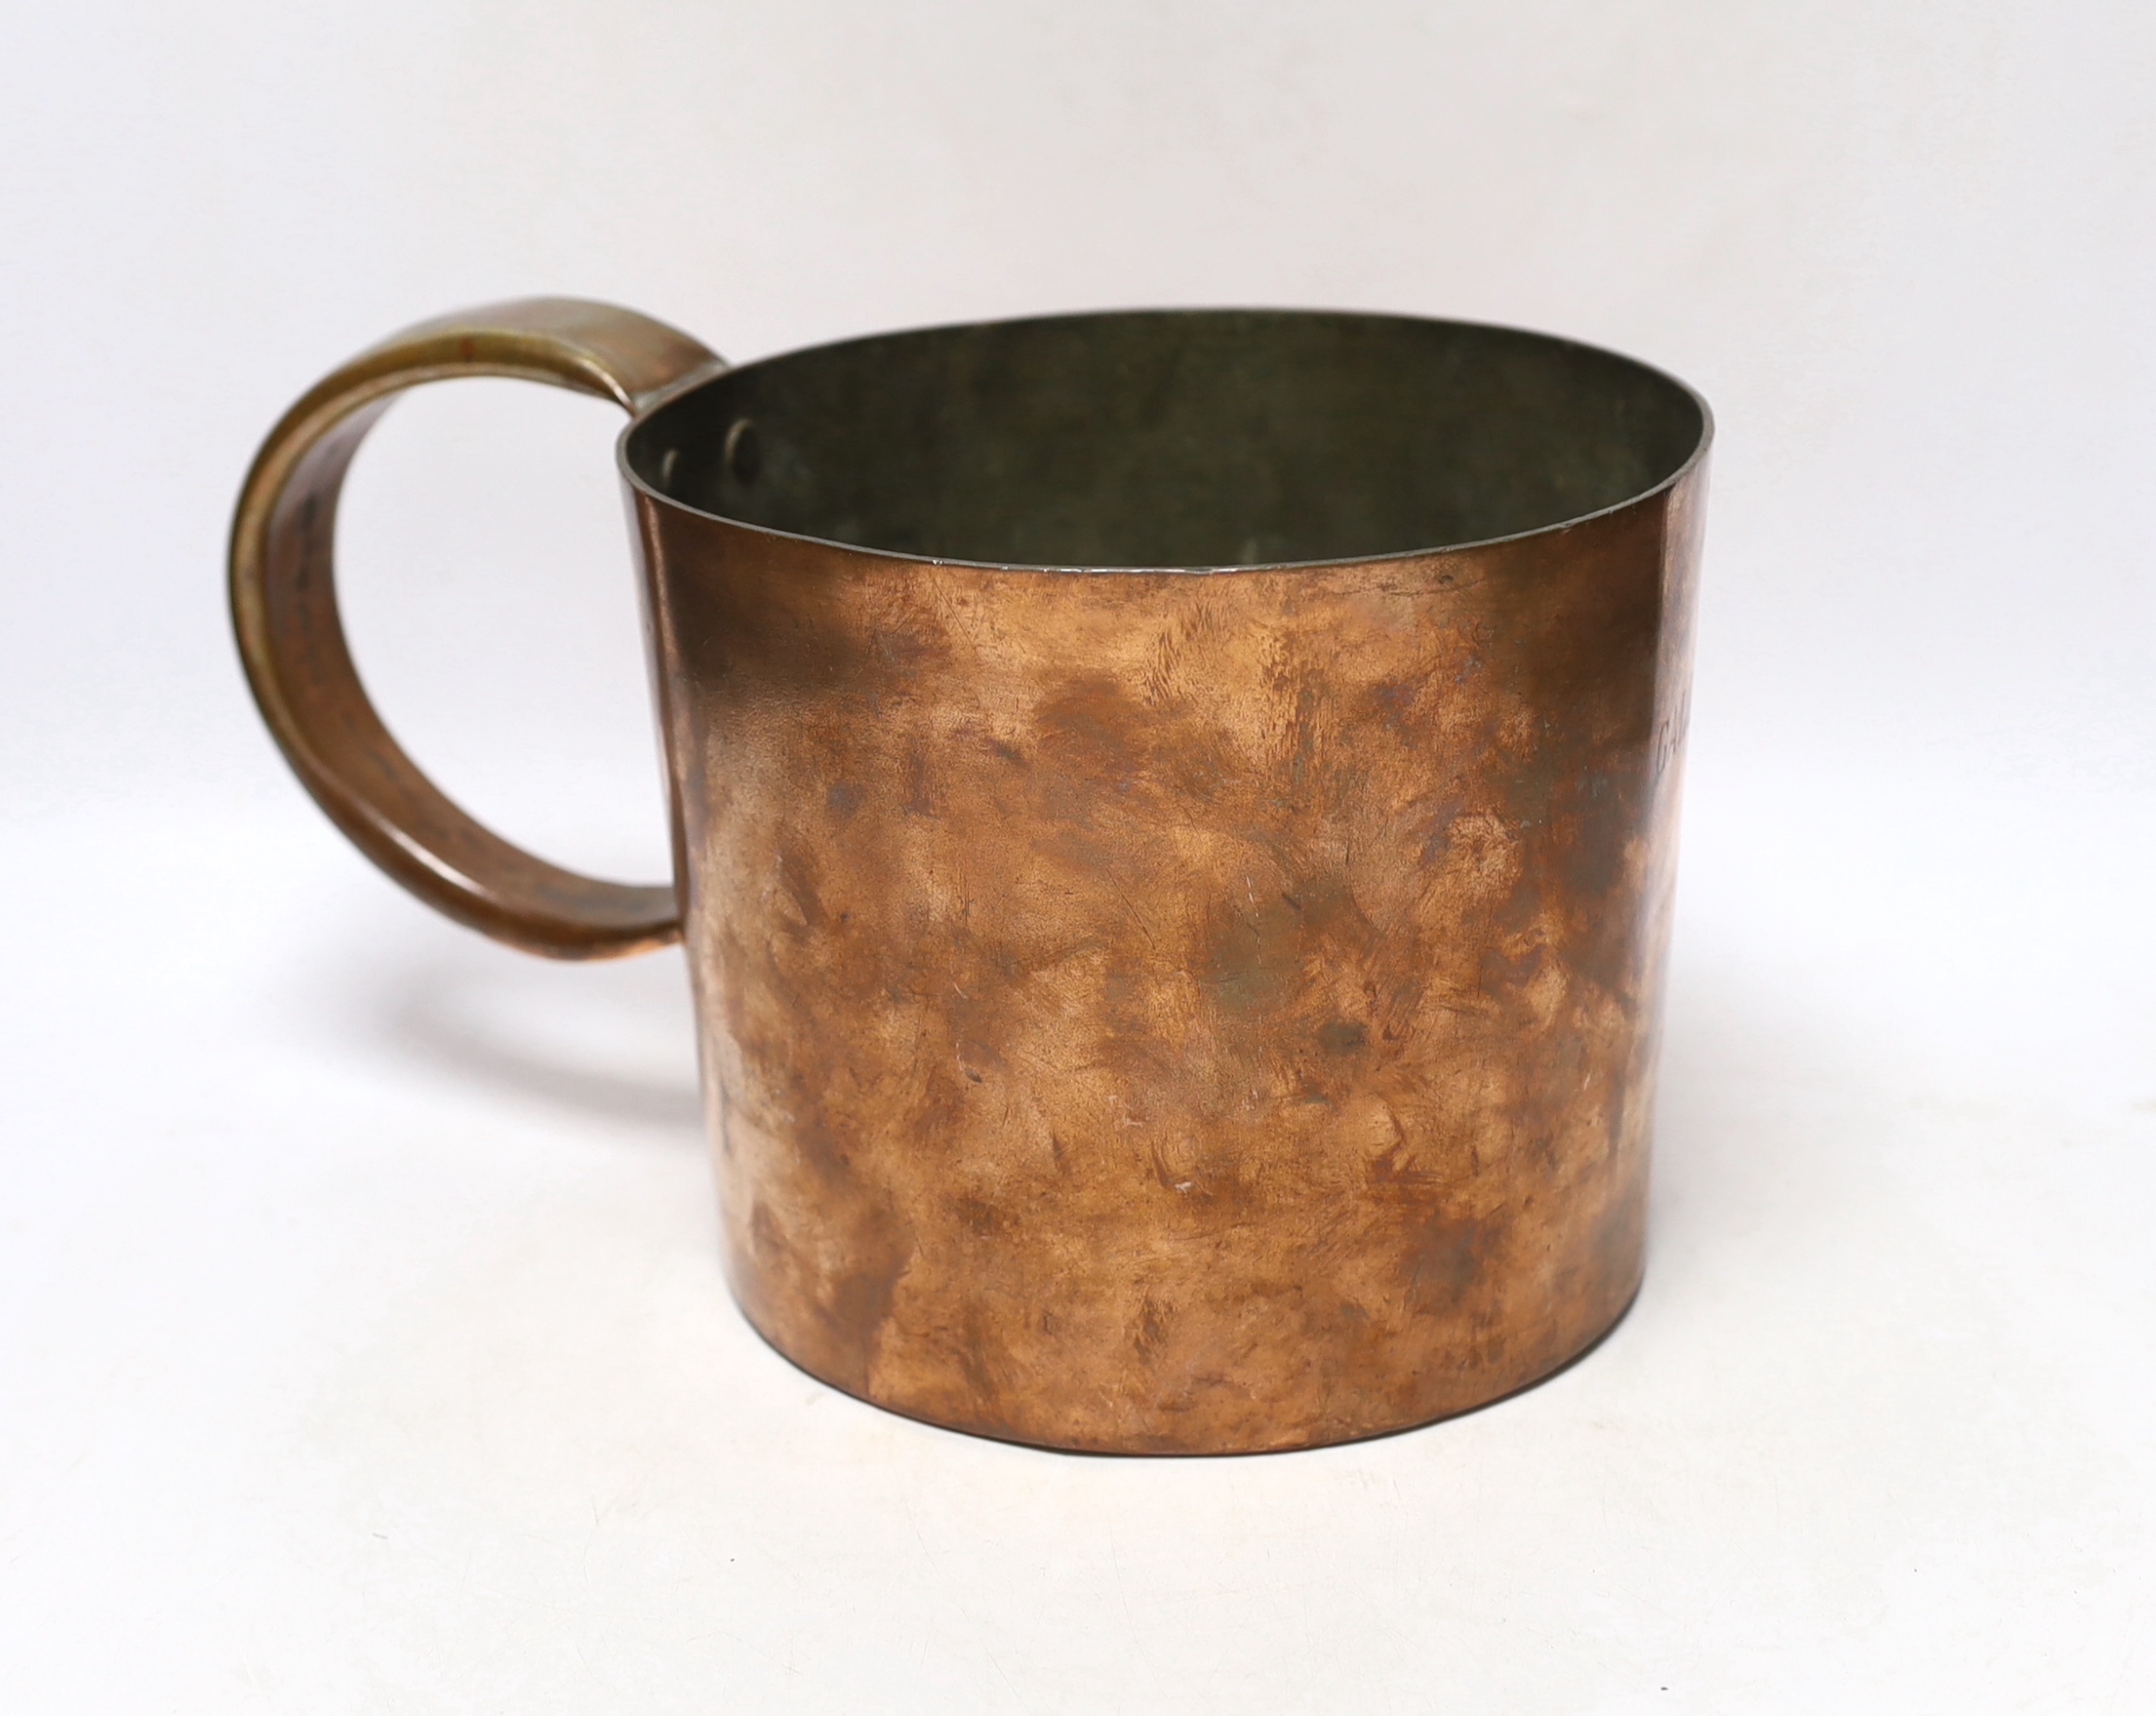 A one gallon Royal Navy rum measure, stamped 1941, handle 18cm high